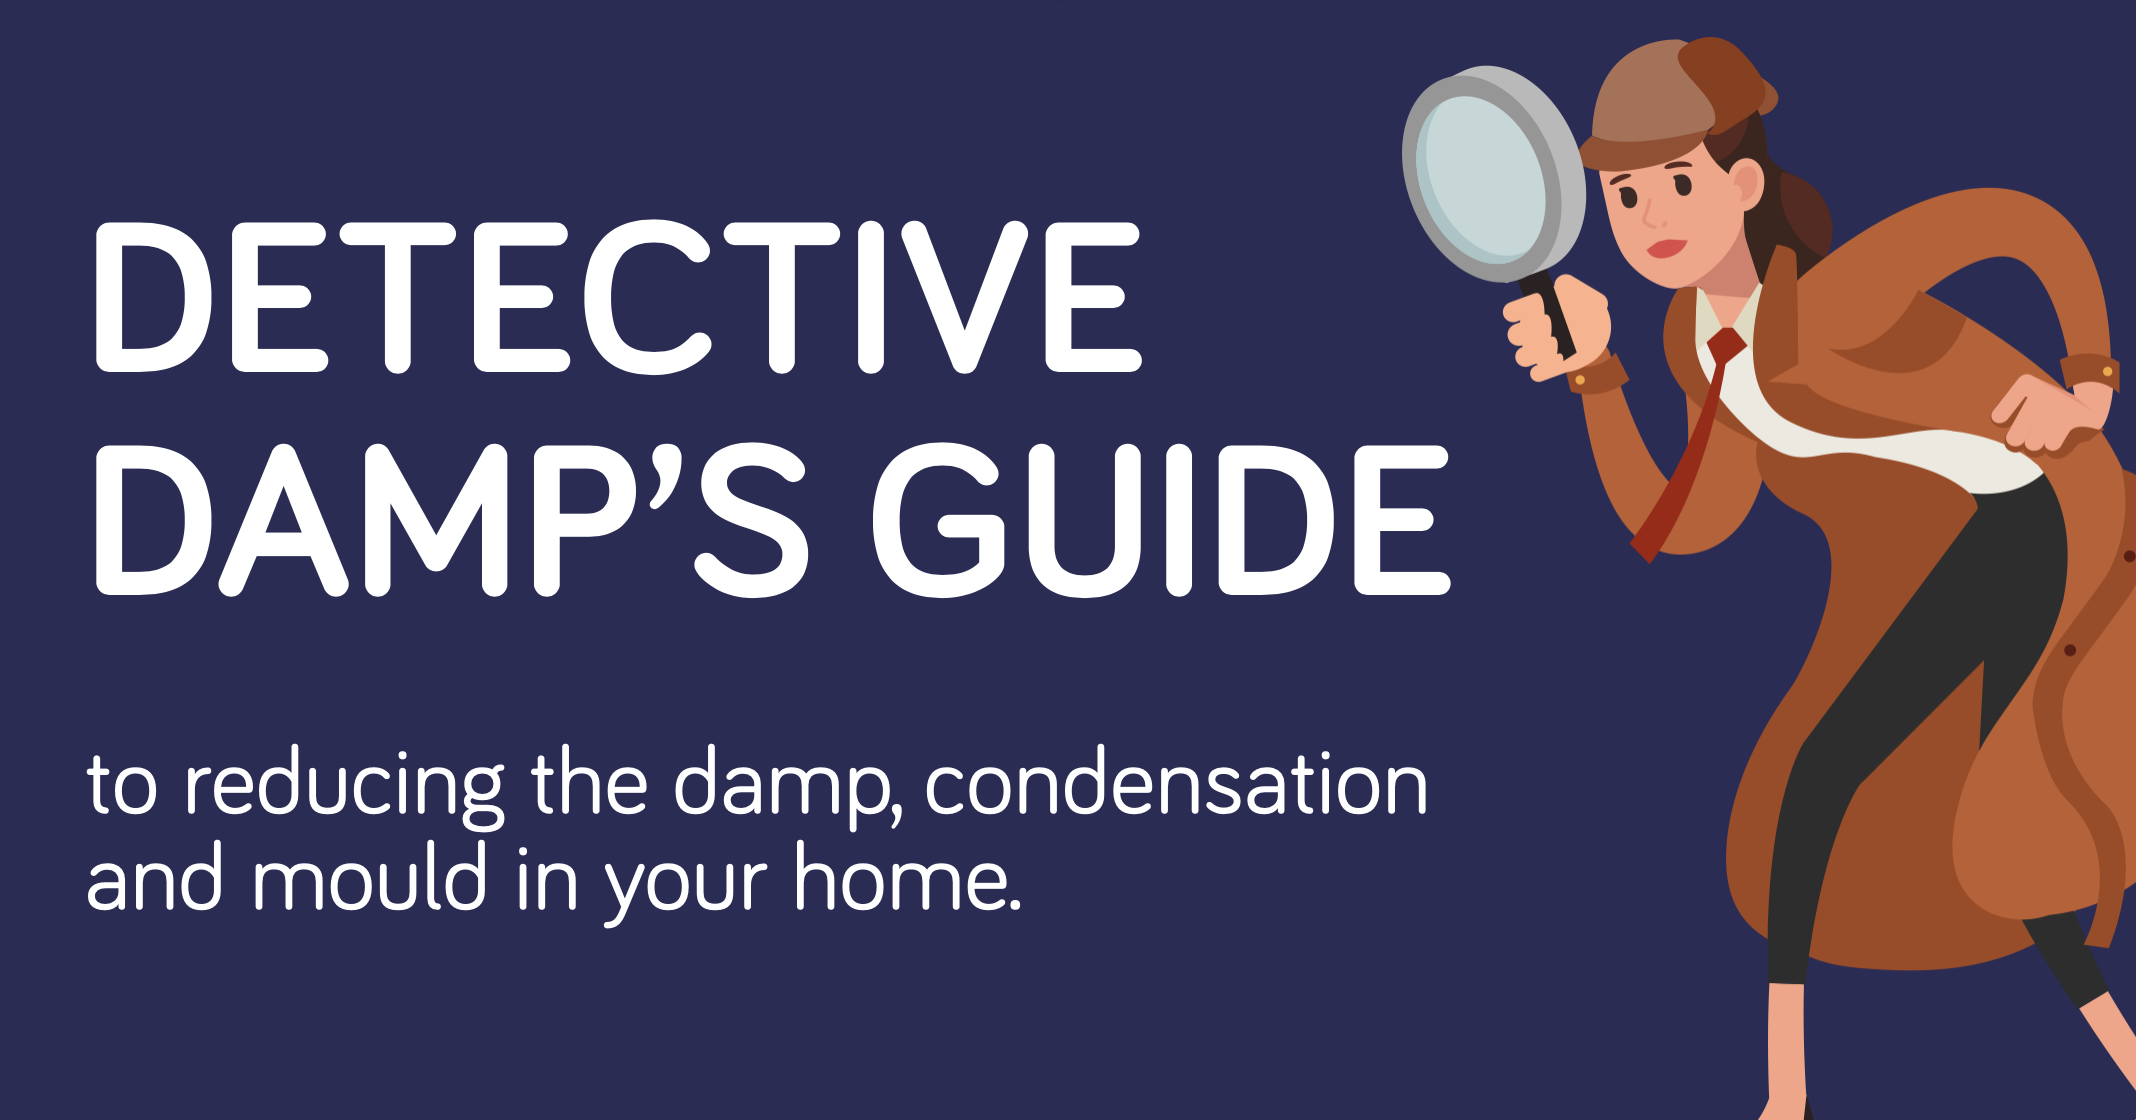 Detective Damp's Guide